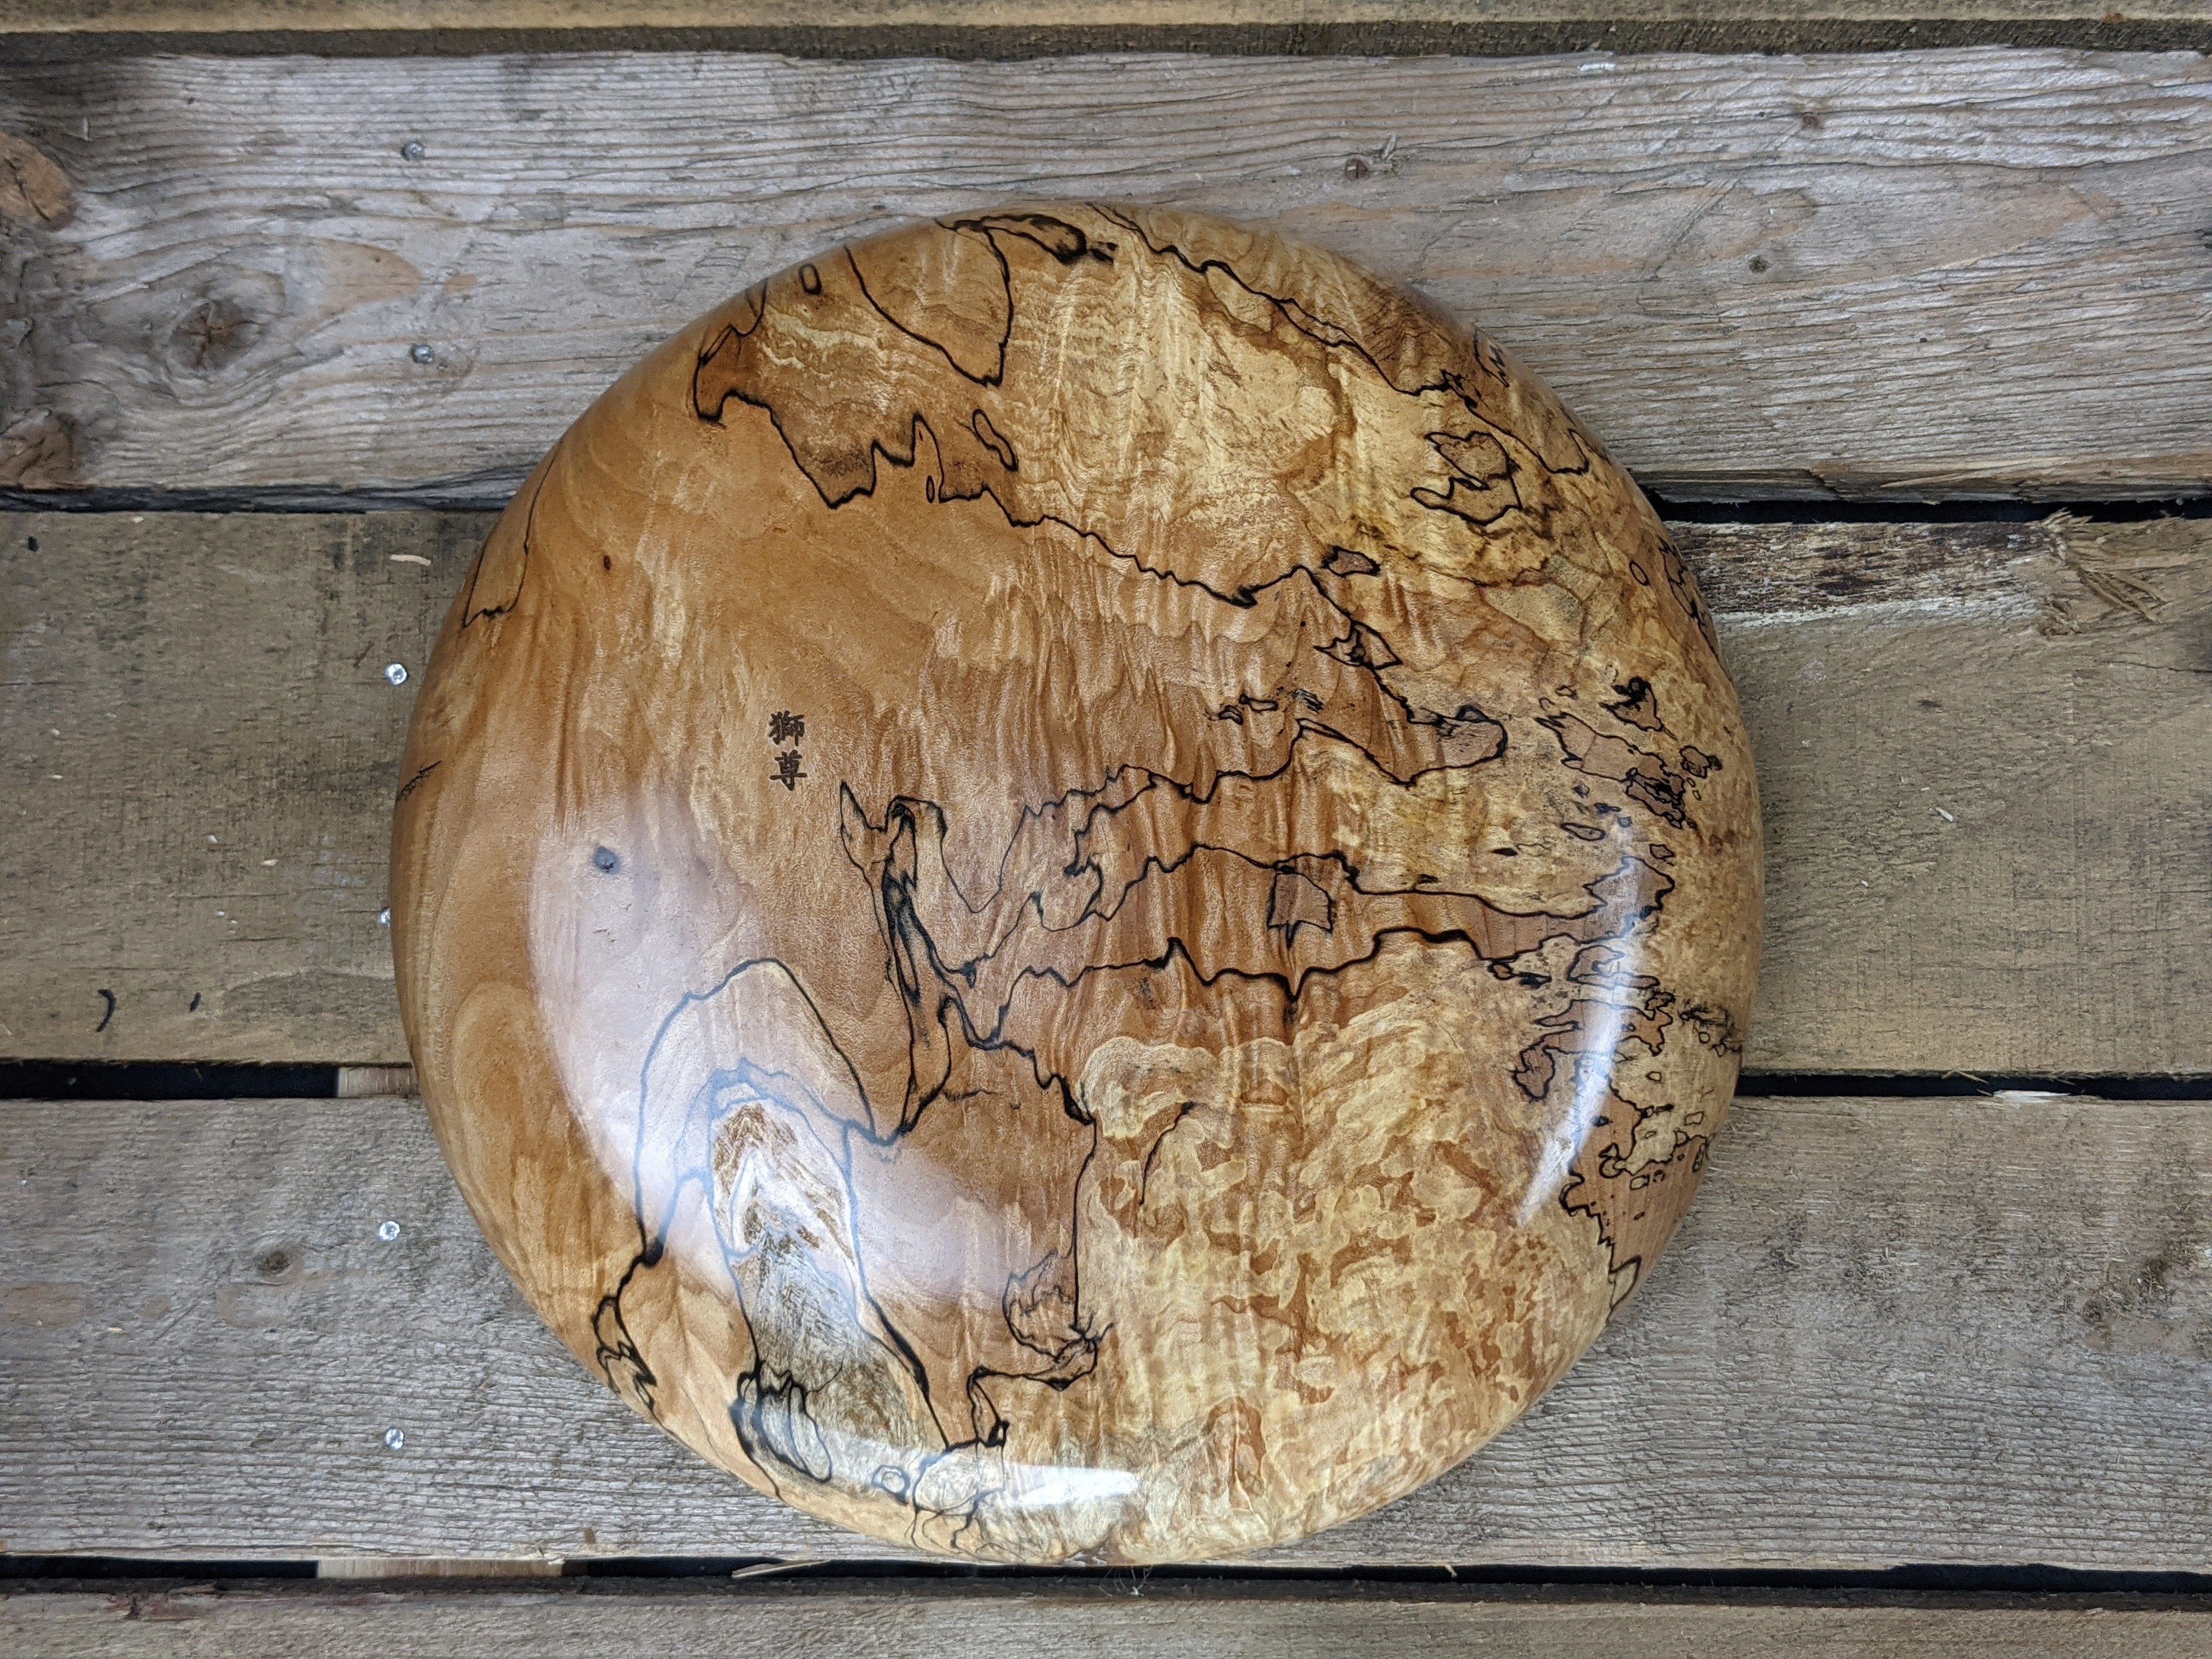 Highly figured and spalted maple dish